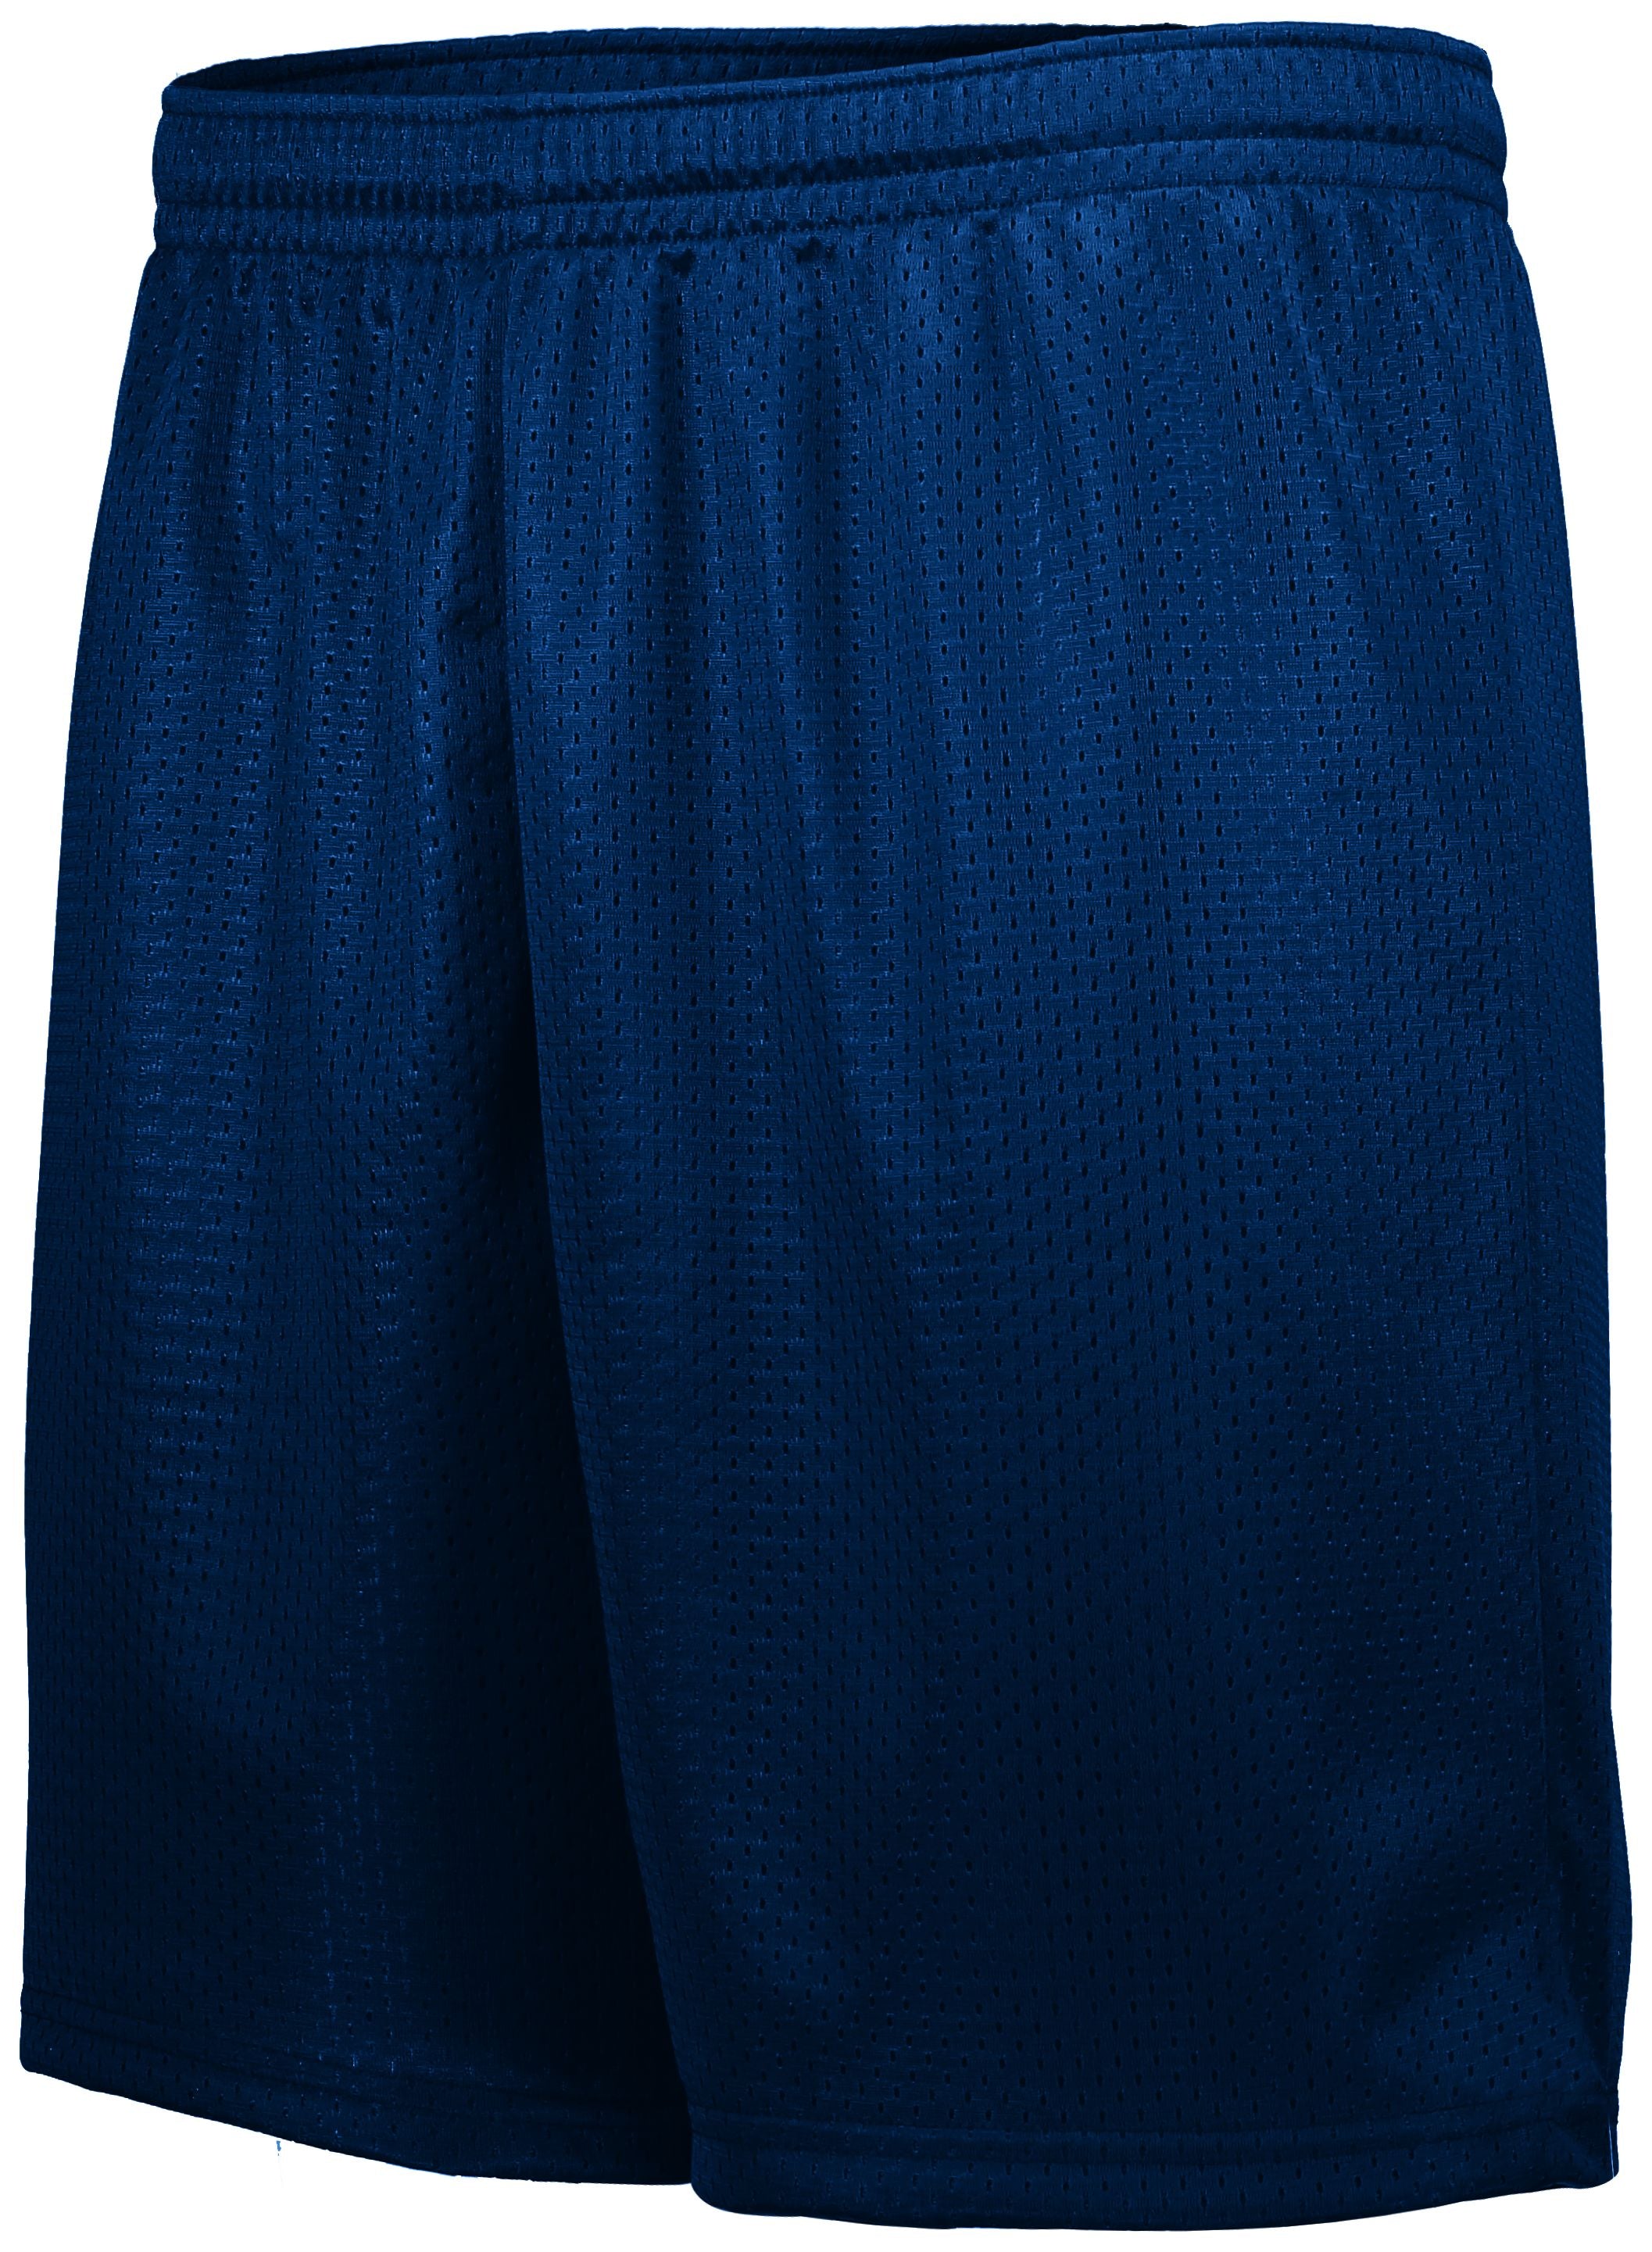 Augusta Sportswear Tricot Mesh Shorts in Navy  -Part of the Adult, Adult-Shorts, Augusta-Products product lines at KanaleyCreations.com